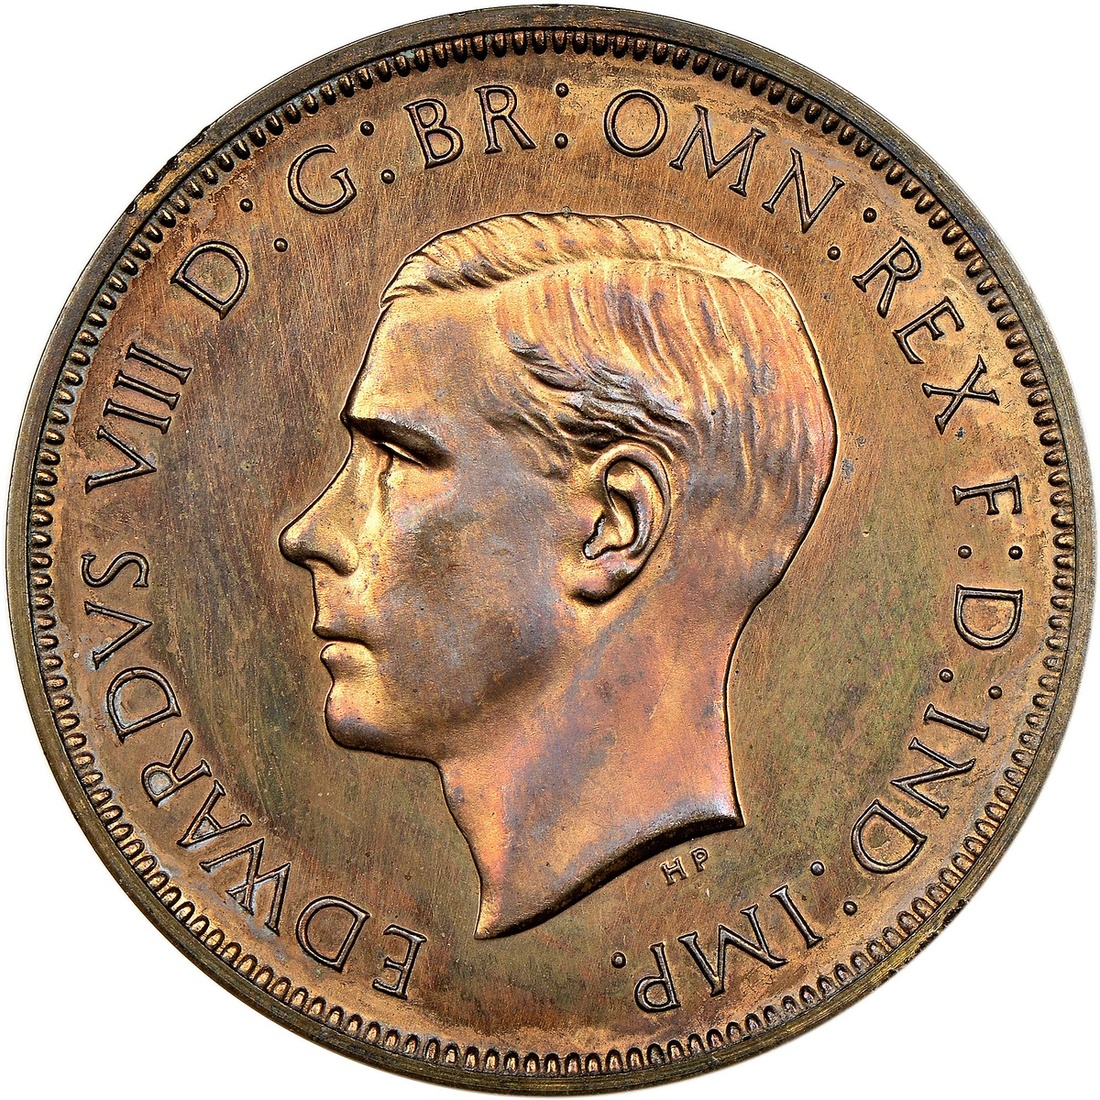 COLLECTING: Edward VIII penny coin sells for £111k